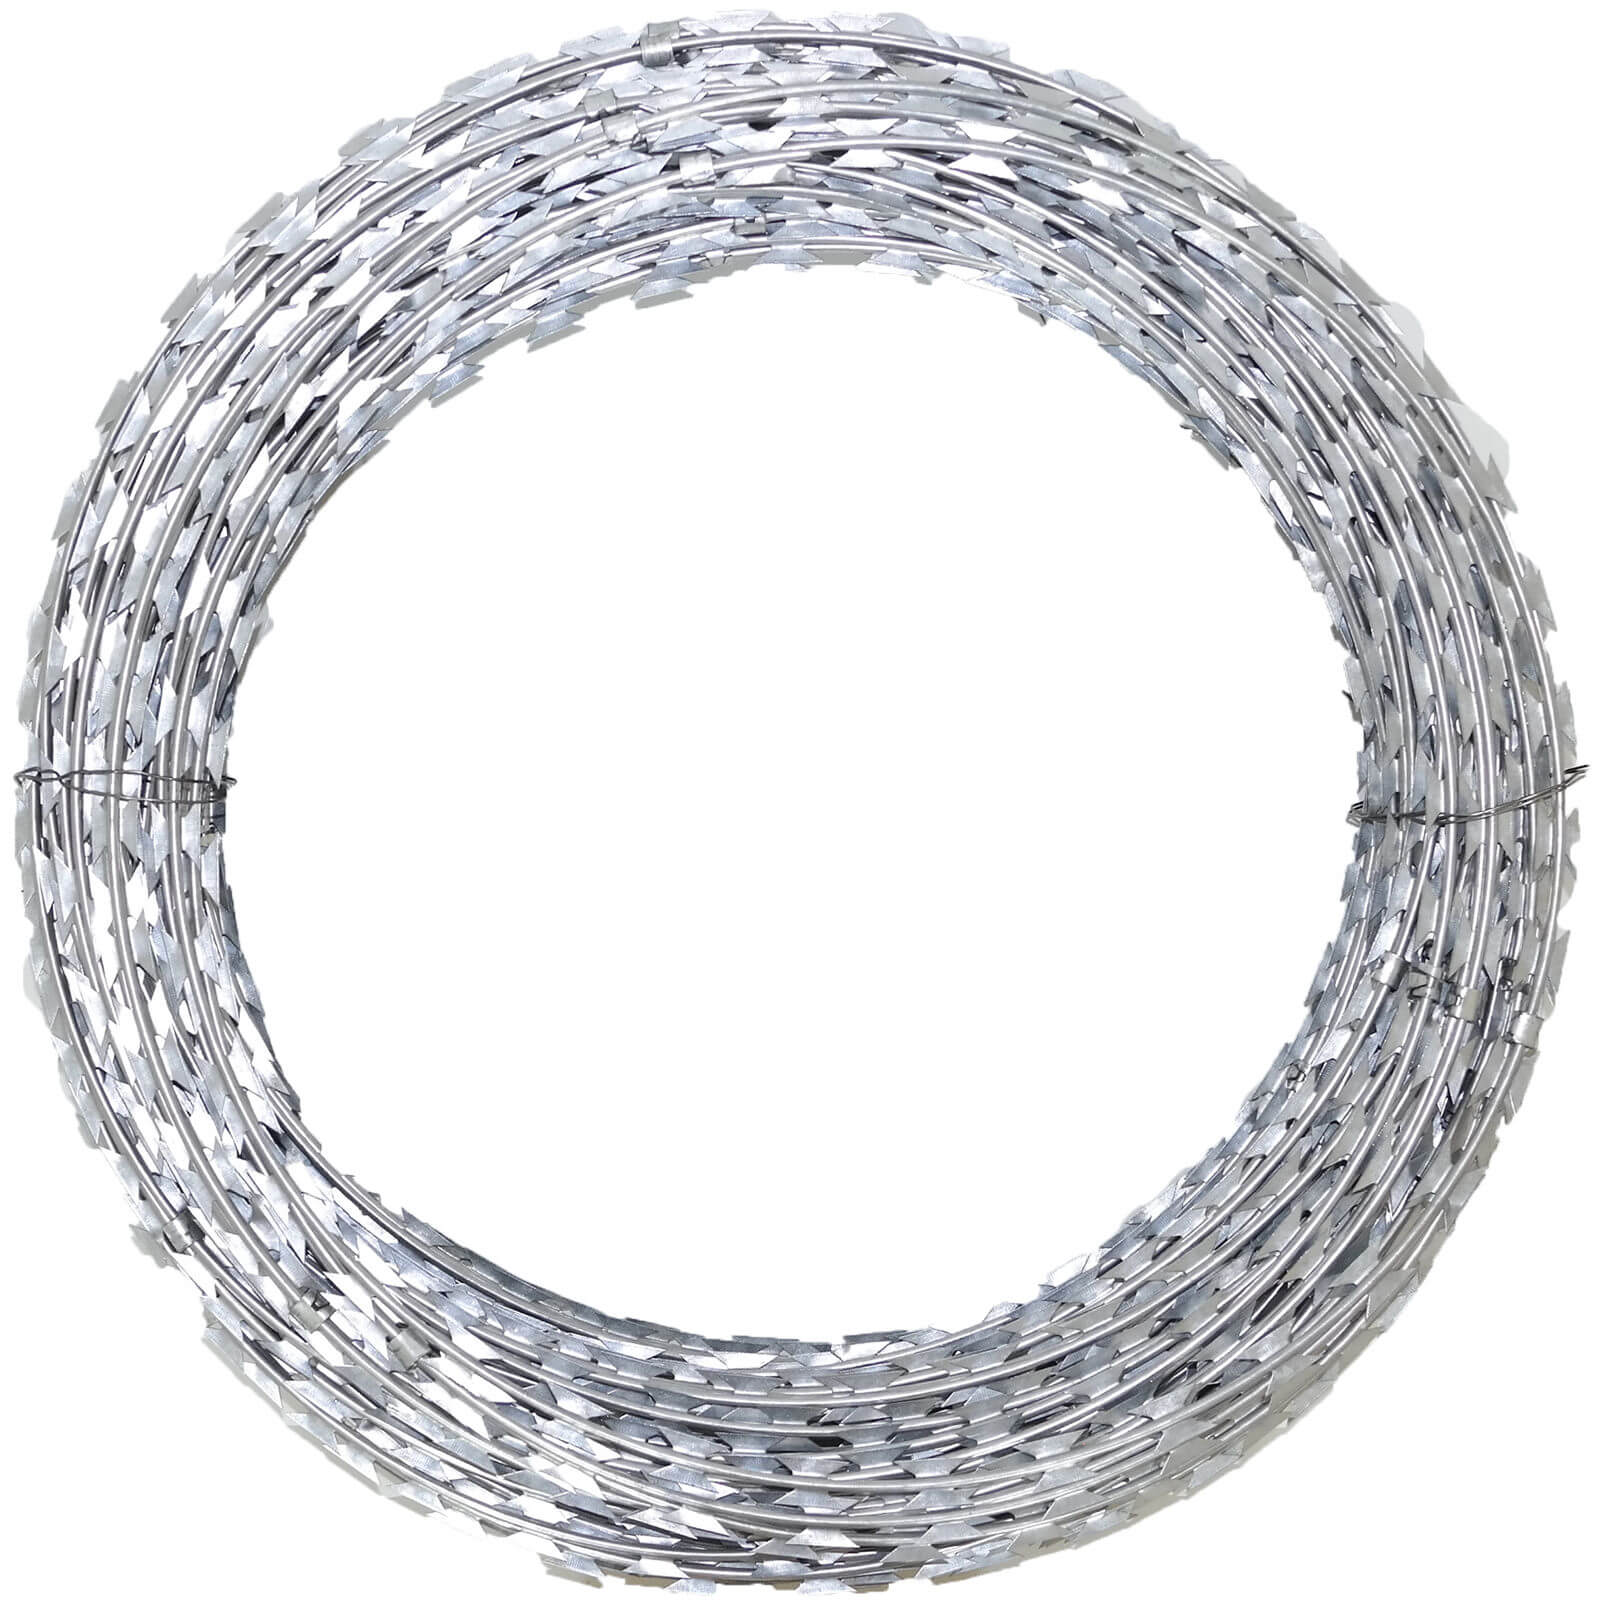 Understanding the different applications of razor wire fencing